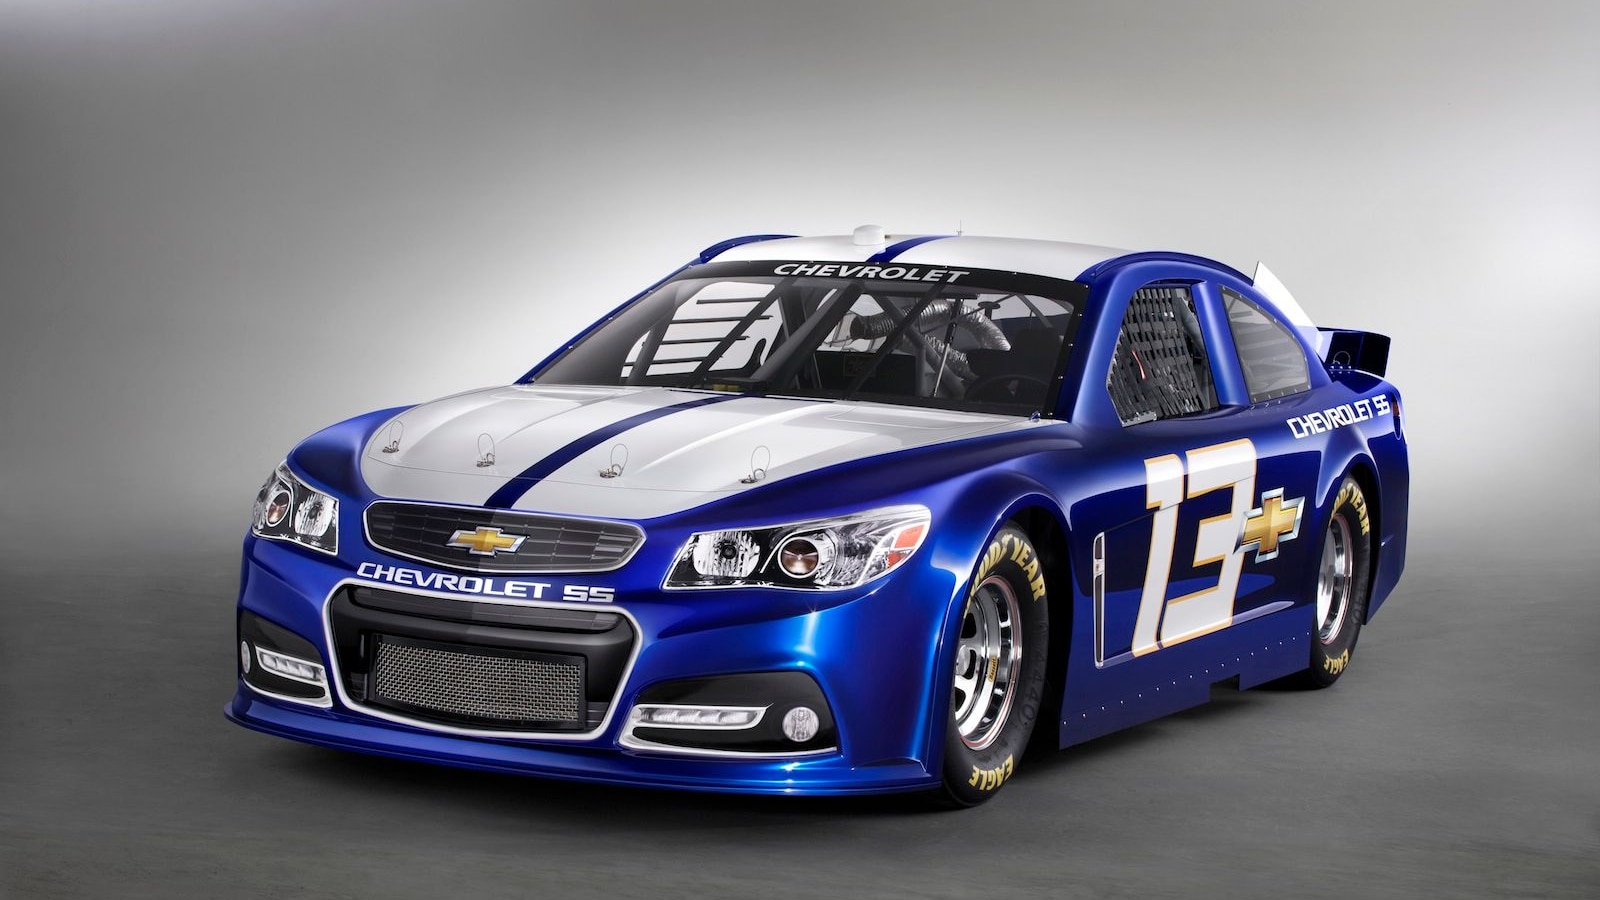 Chevy Debuts SS-Based NASCAR Sprint Cup Racer In Las Vegas